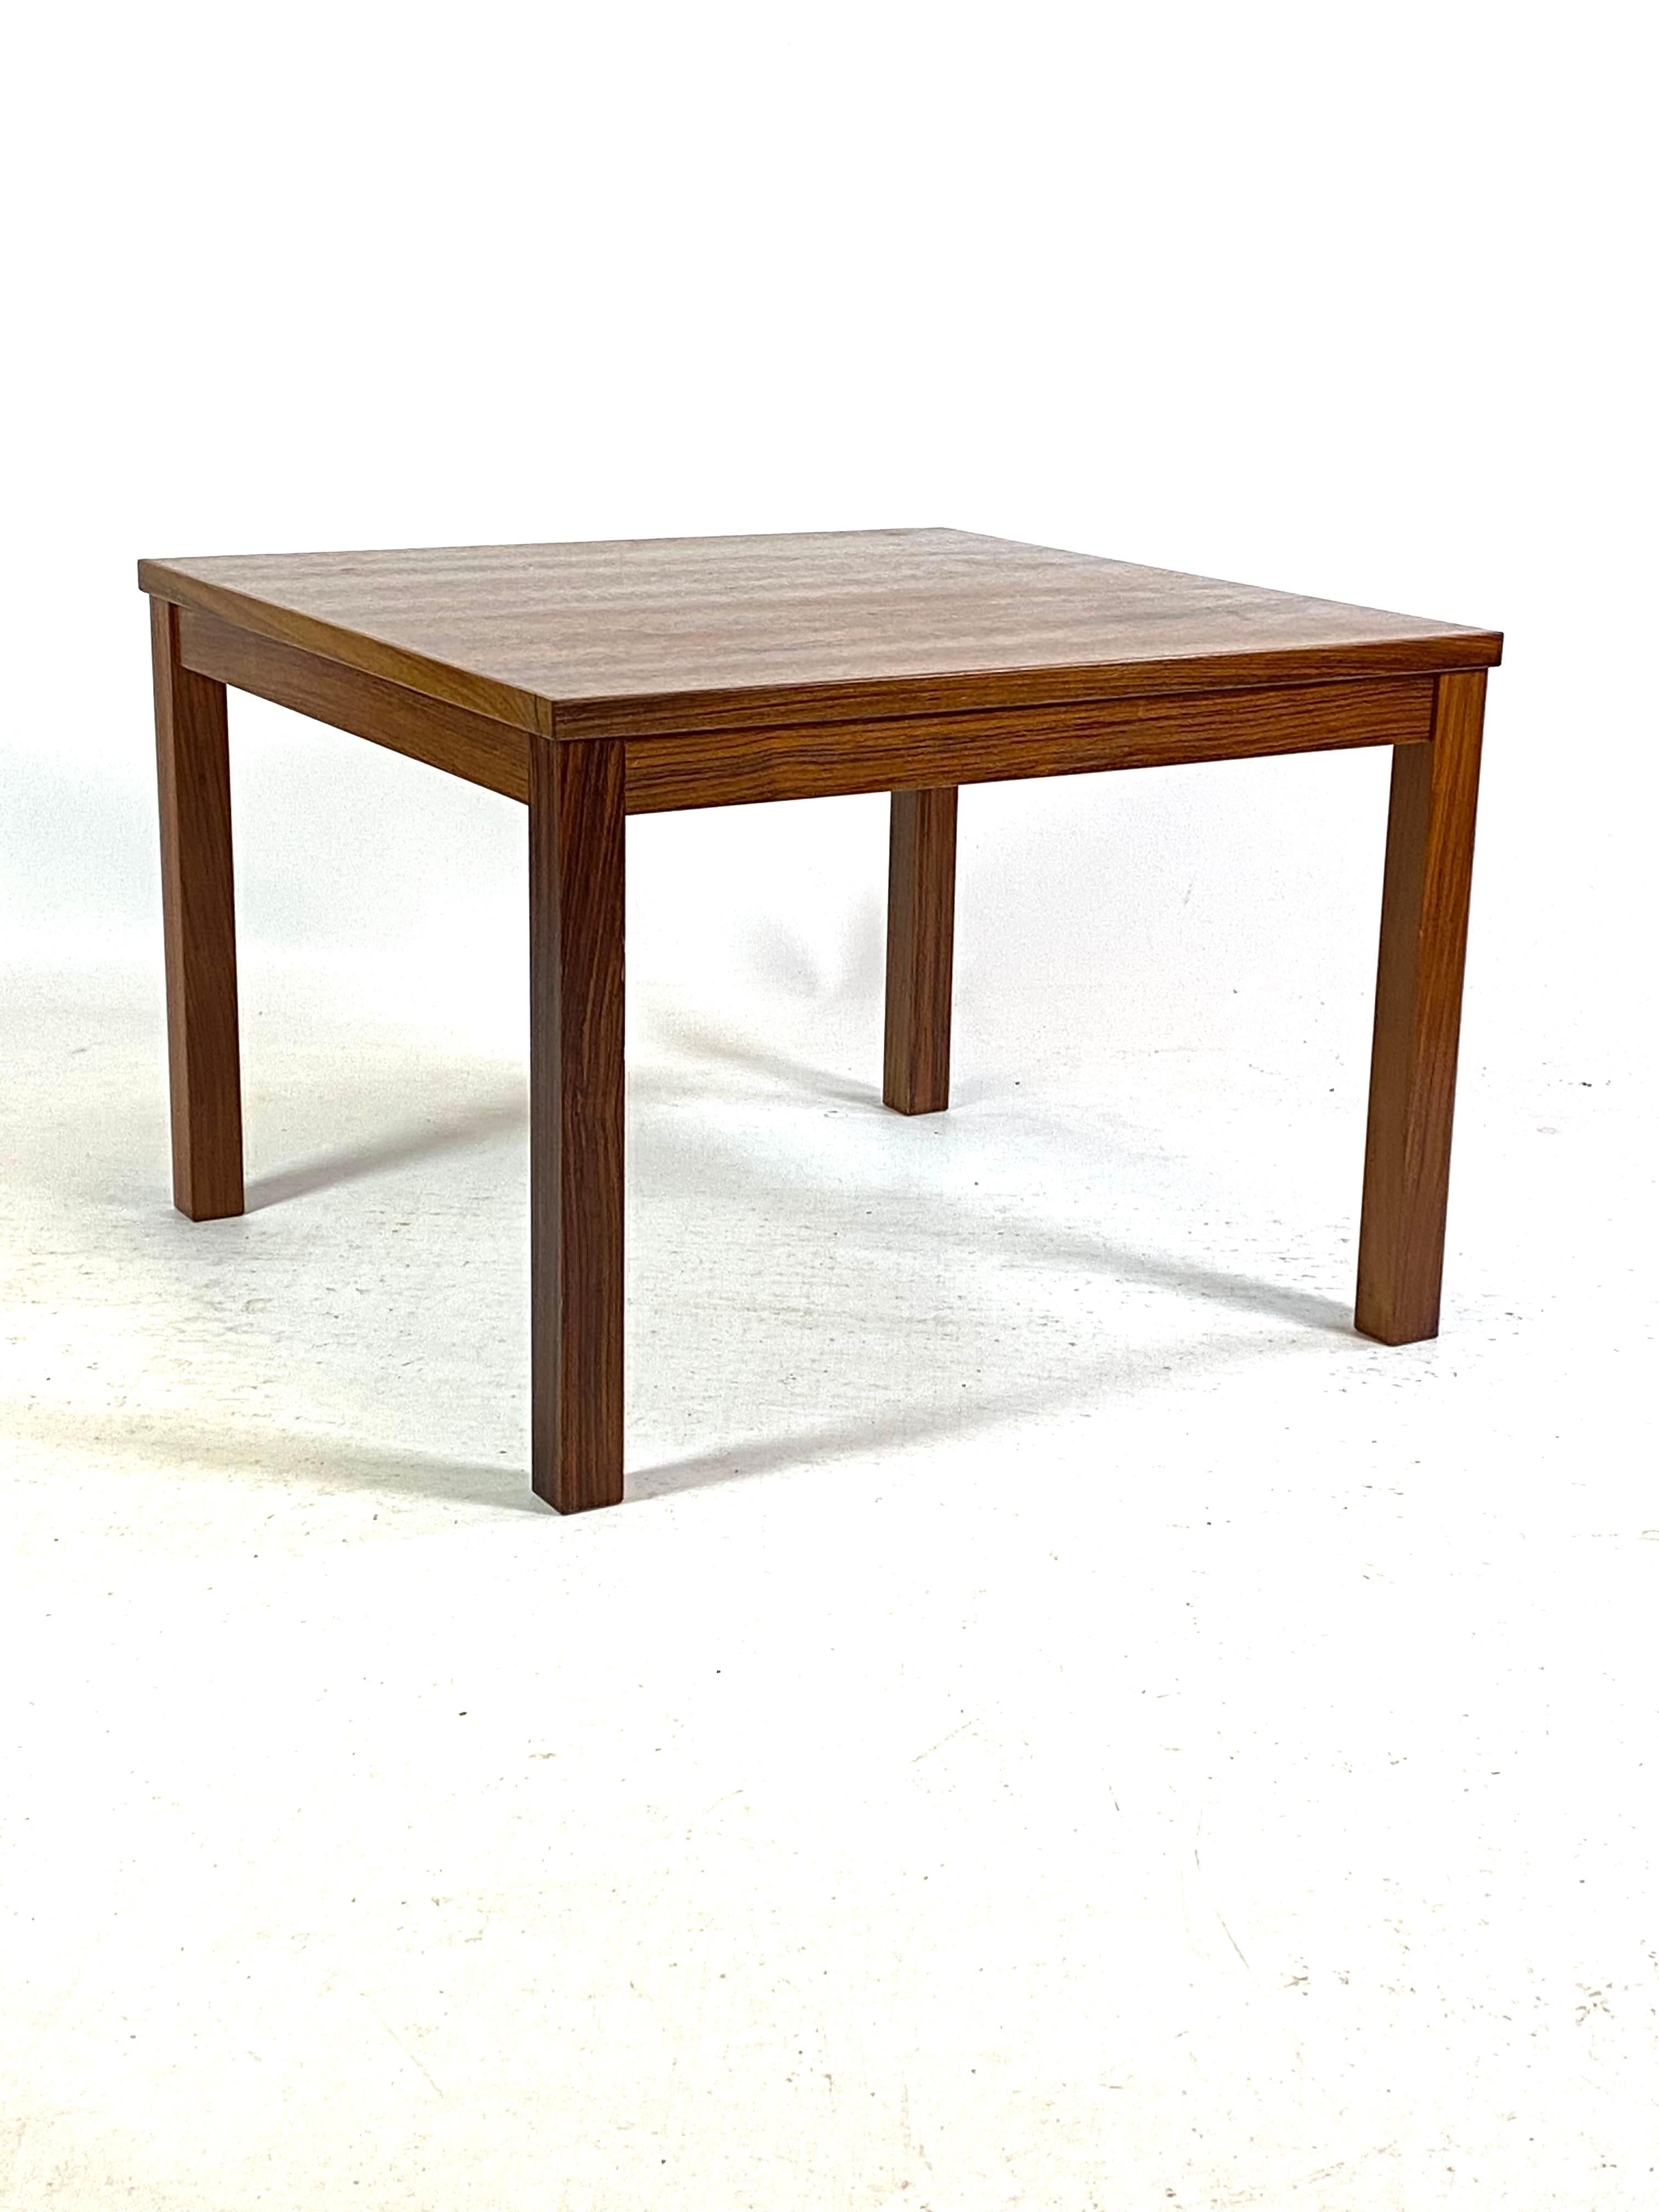 Coffee table in rosewood of Danish design from the 1960s. The table is in great vintage condition.